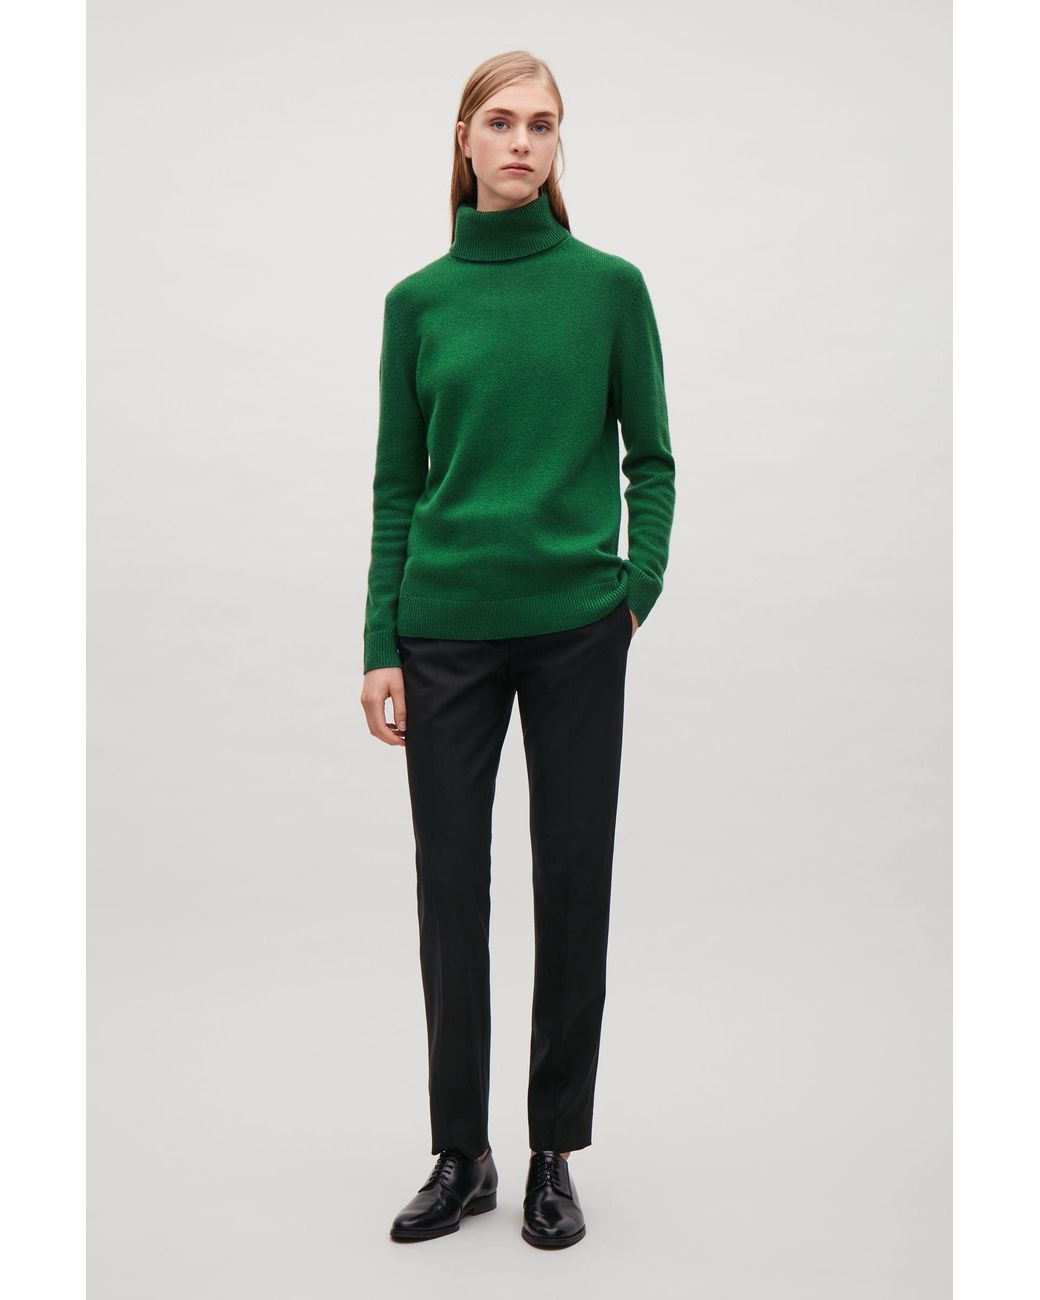 COS High-neck Cashmere Jumper in Green | Lyst